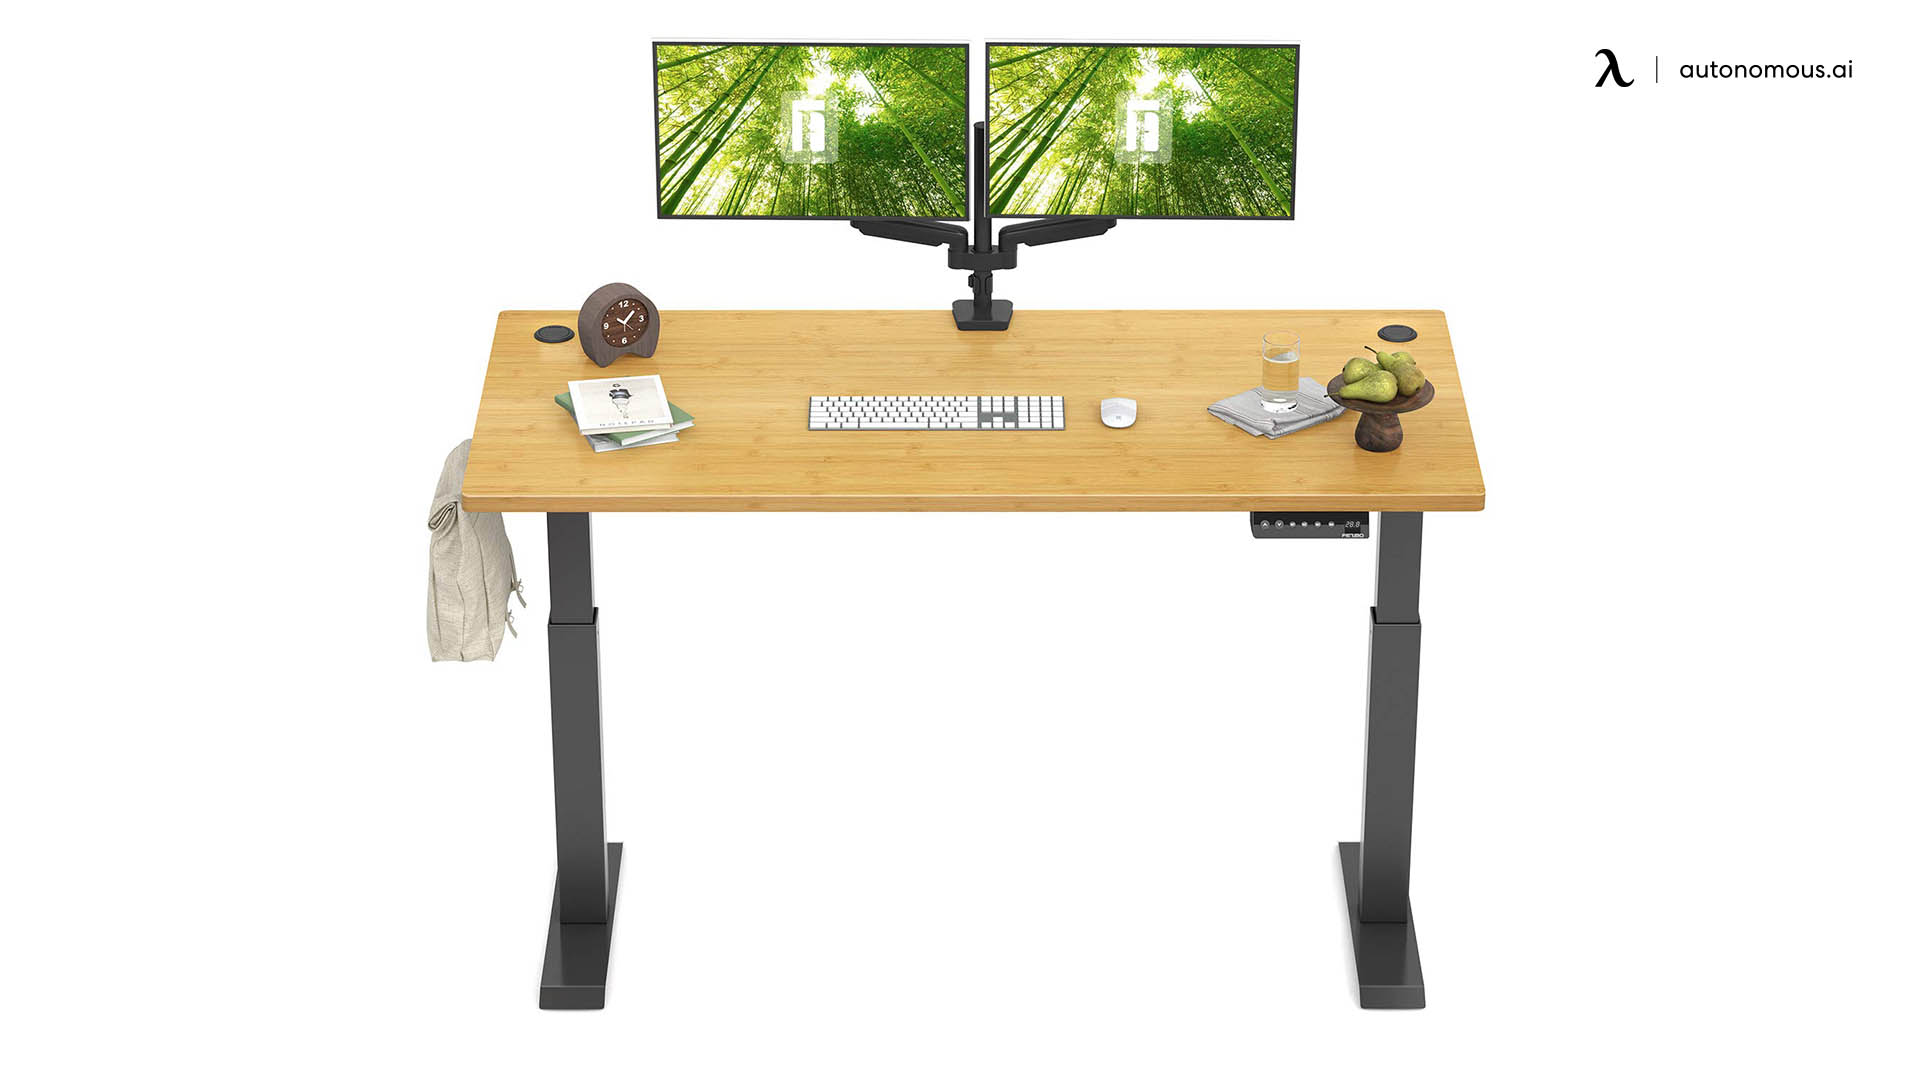 The FEZIBO electric height adjustable standing desk